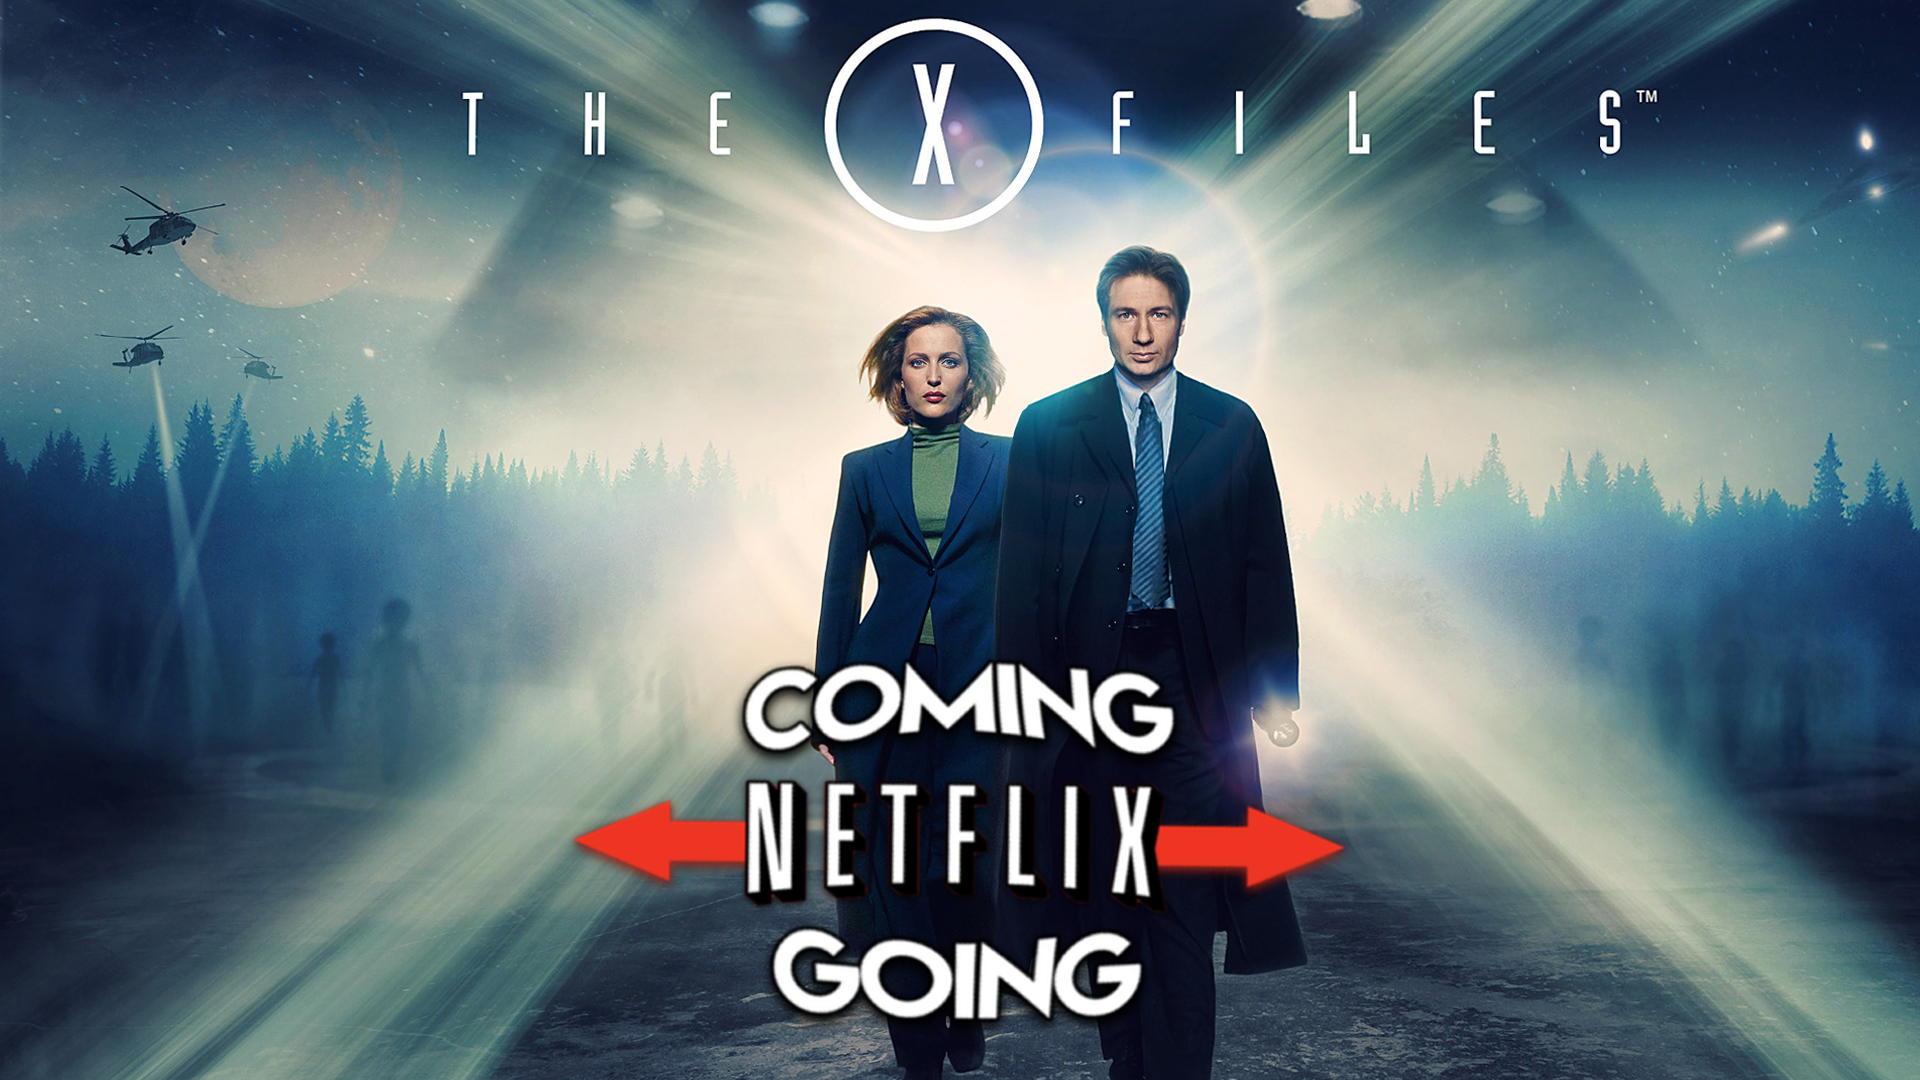 Netflix in april: everything coming and going